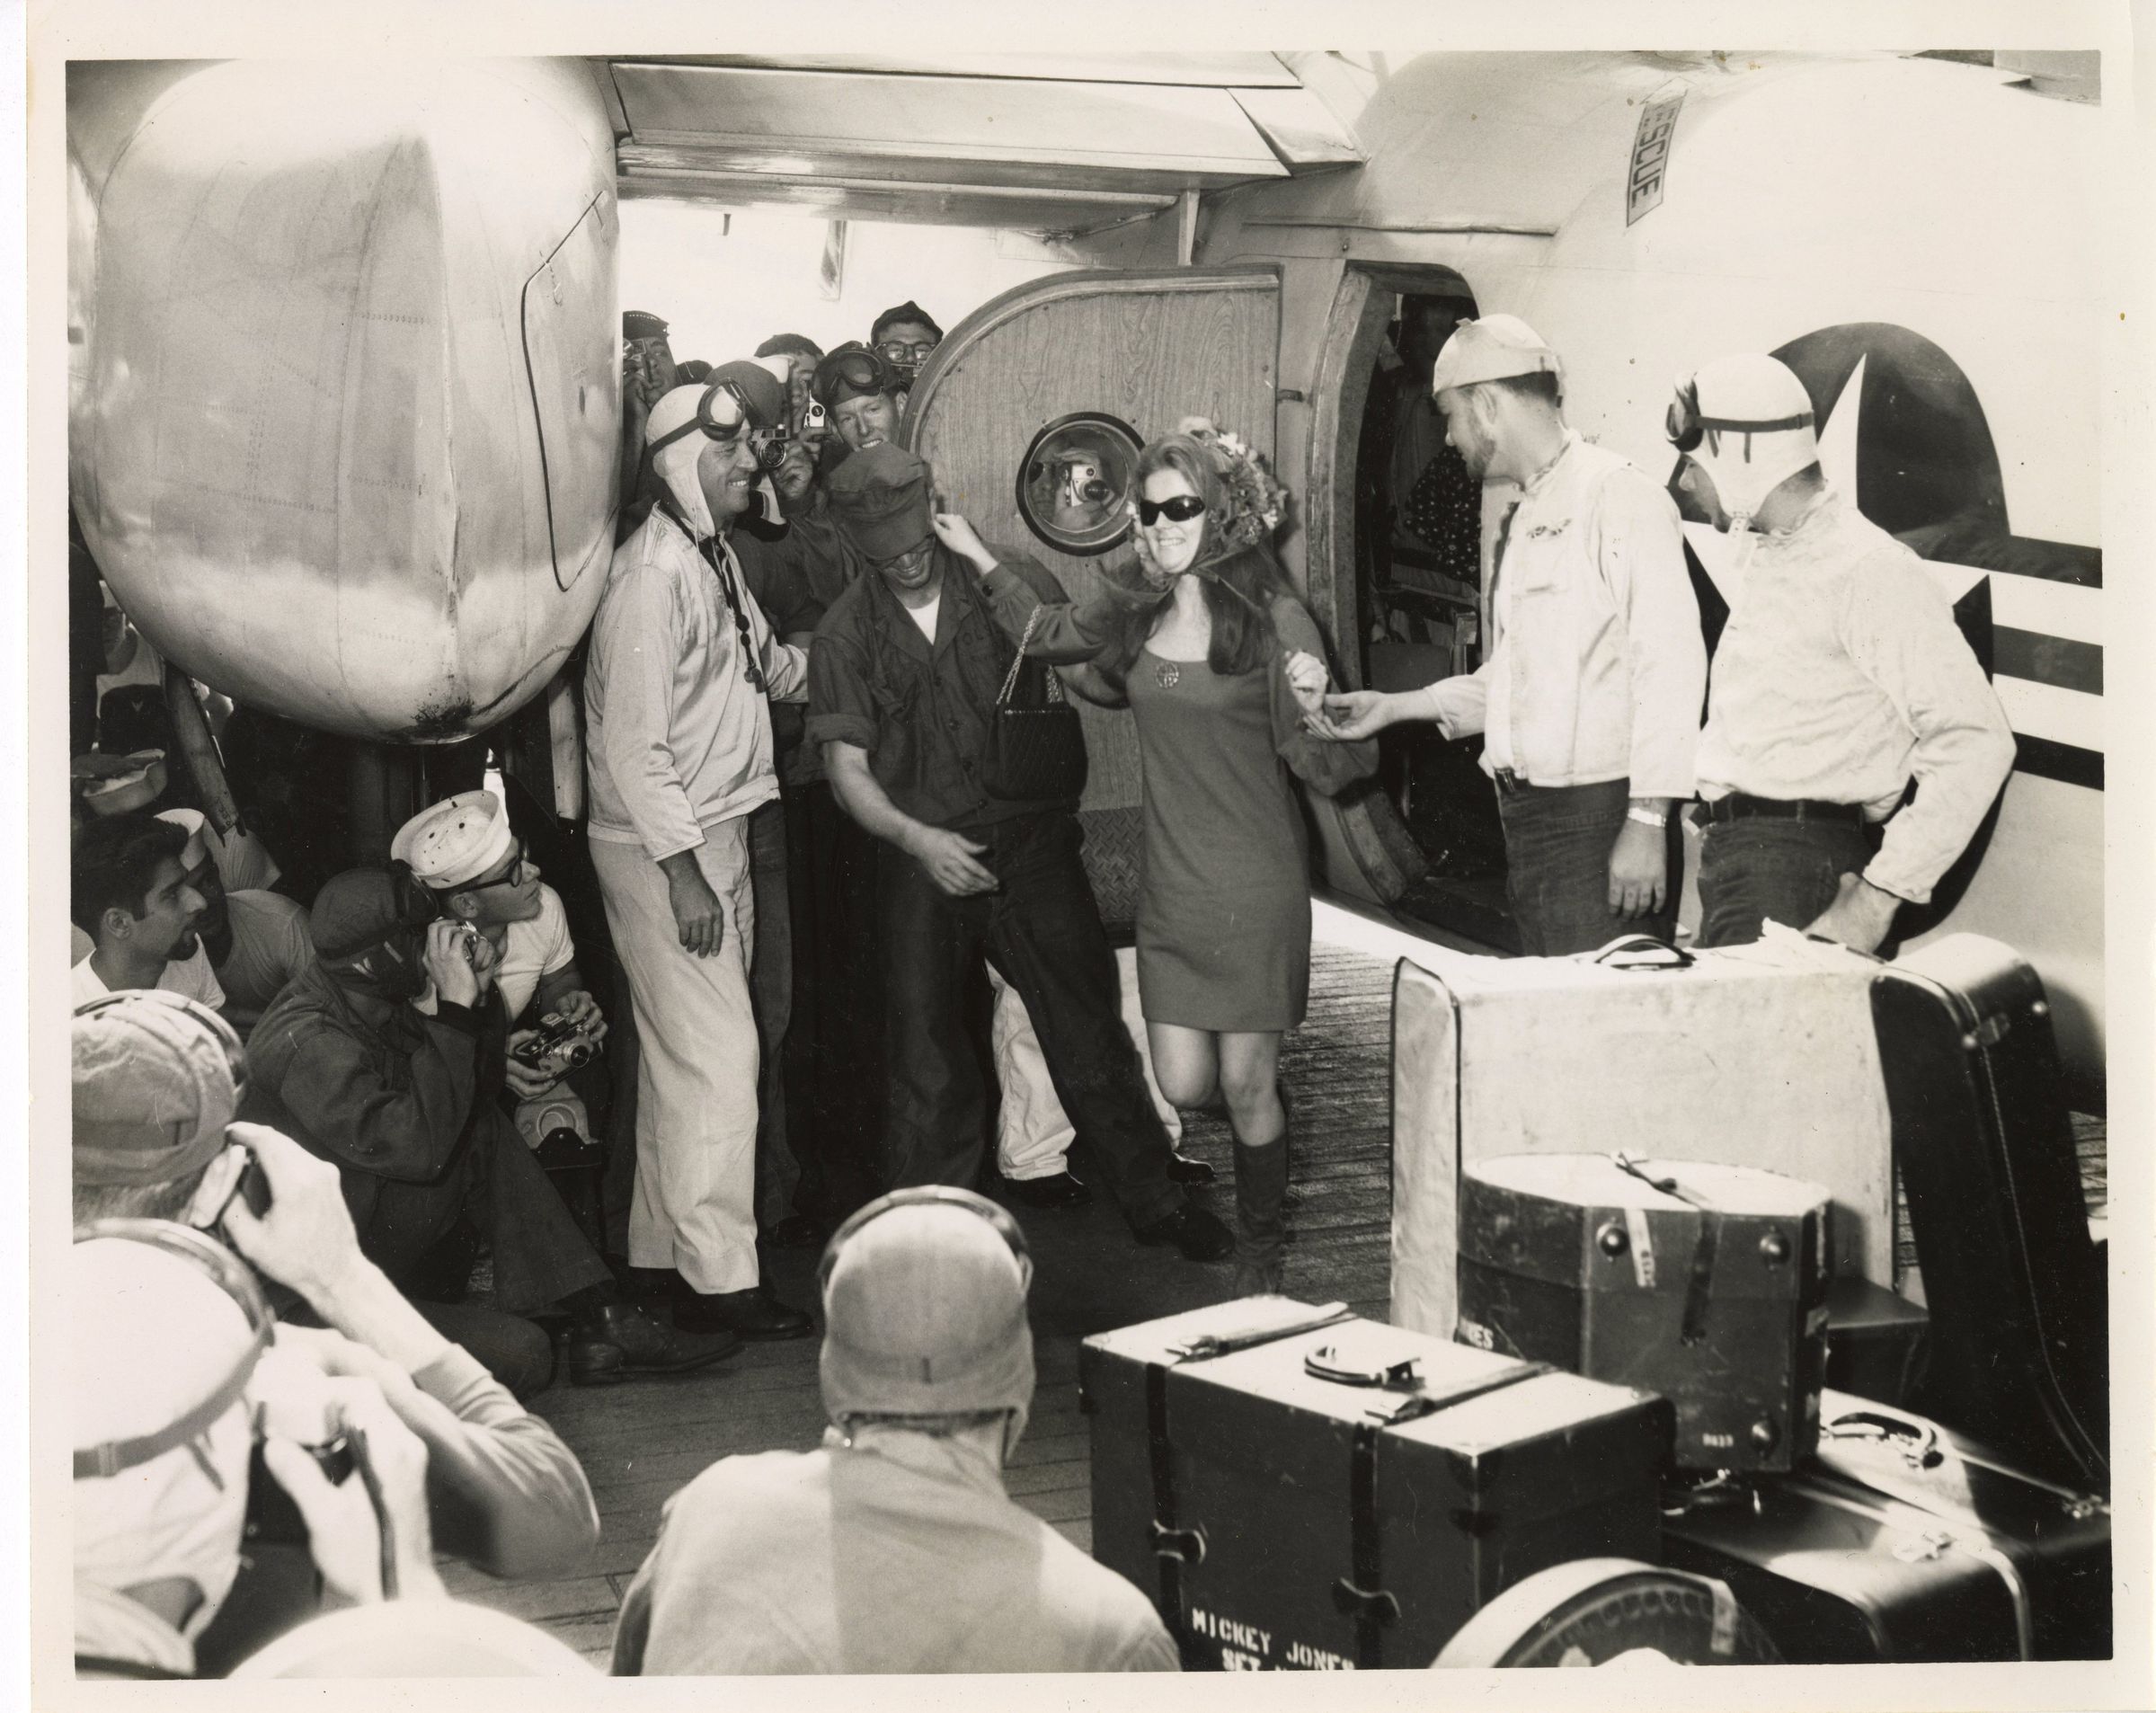 Primary Image of Ann-Margret Comes Aboard the USS Yorktown (CVS-10)